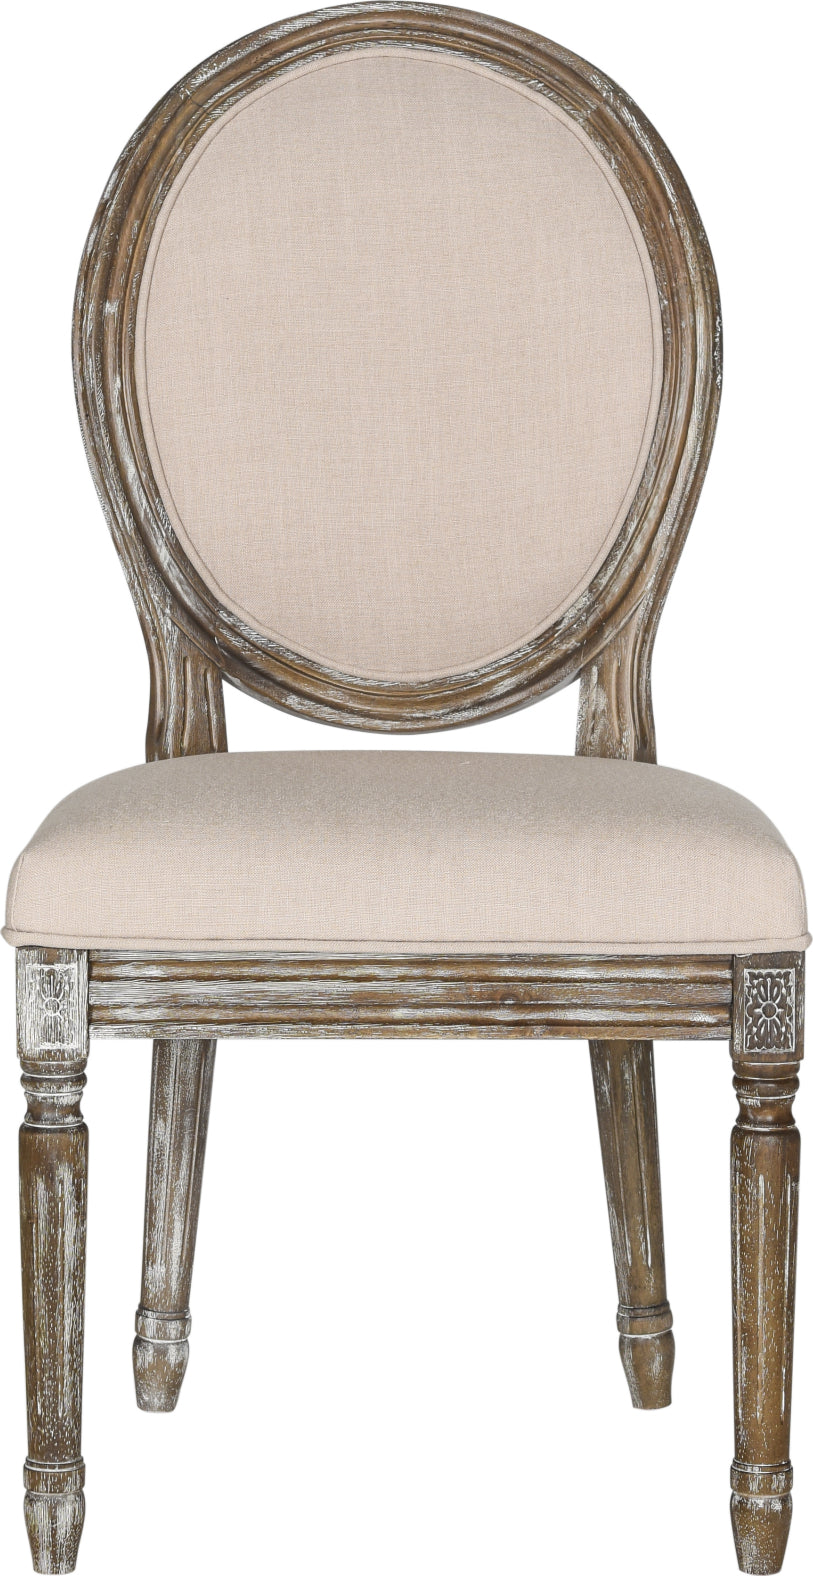 Safavieh Holloway 19''H French Brasserie Linen Oval Side Chair Beige and Rustic Oak Furniture main image